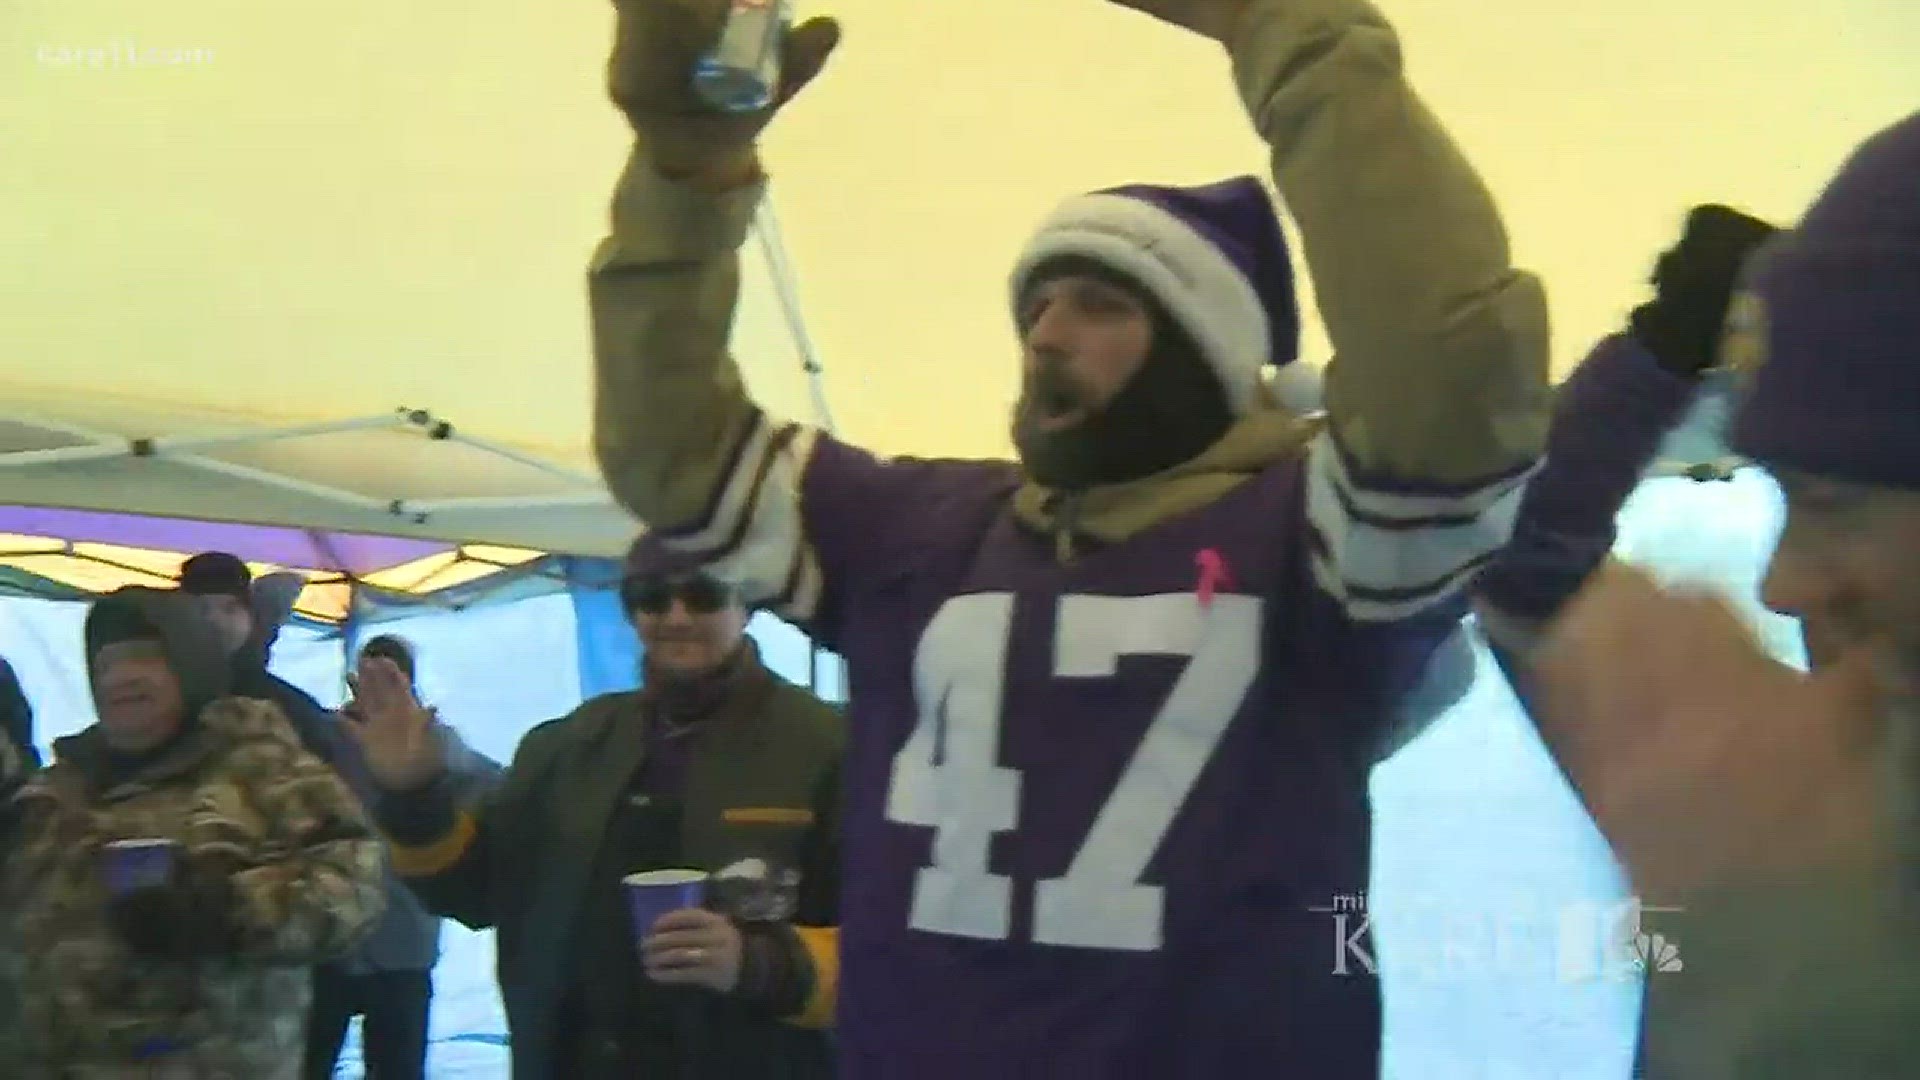 When the team is hot and the temps are cold, you can learn a lot about what kind of fan you are. And a lot of the die-hard Vikings fans were still tailgating in dangerously cold temps on Sunday.